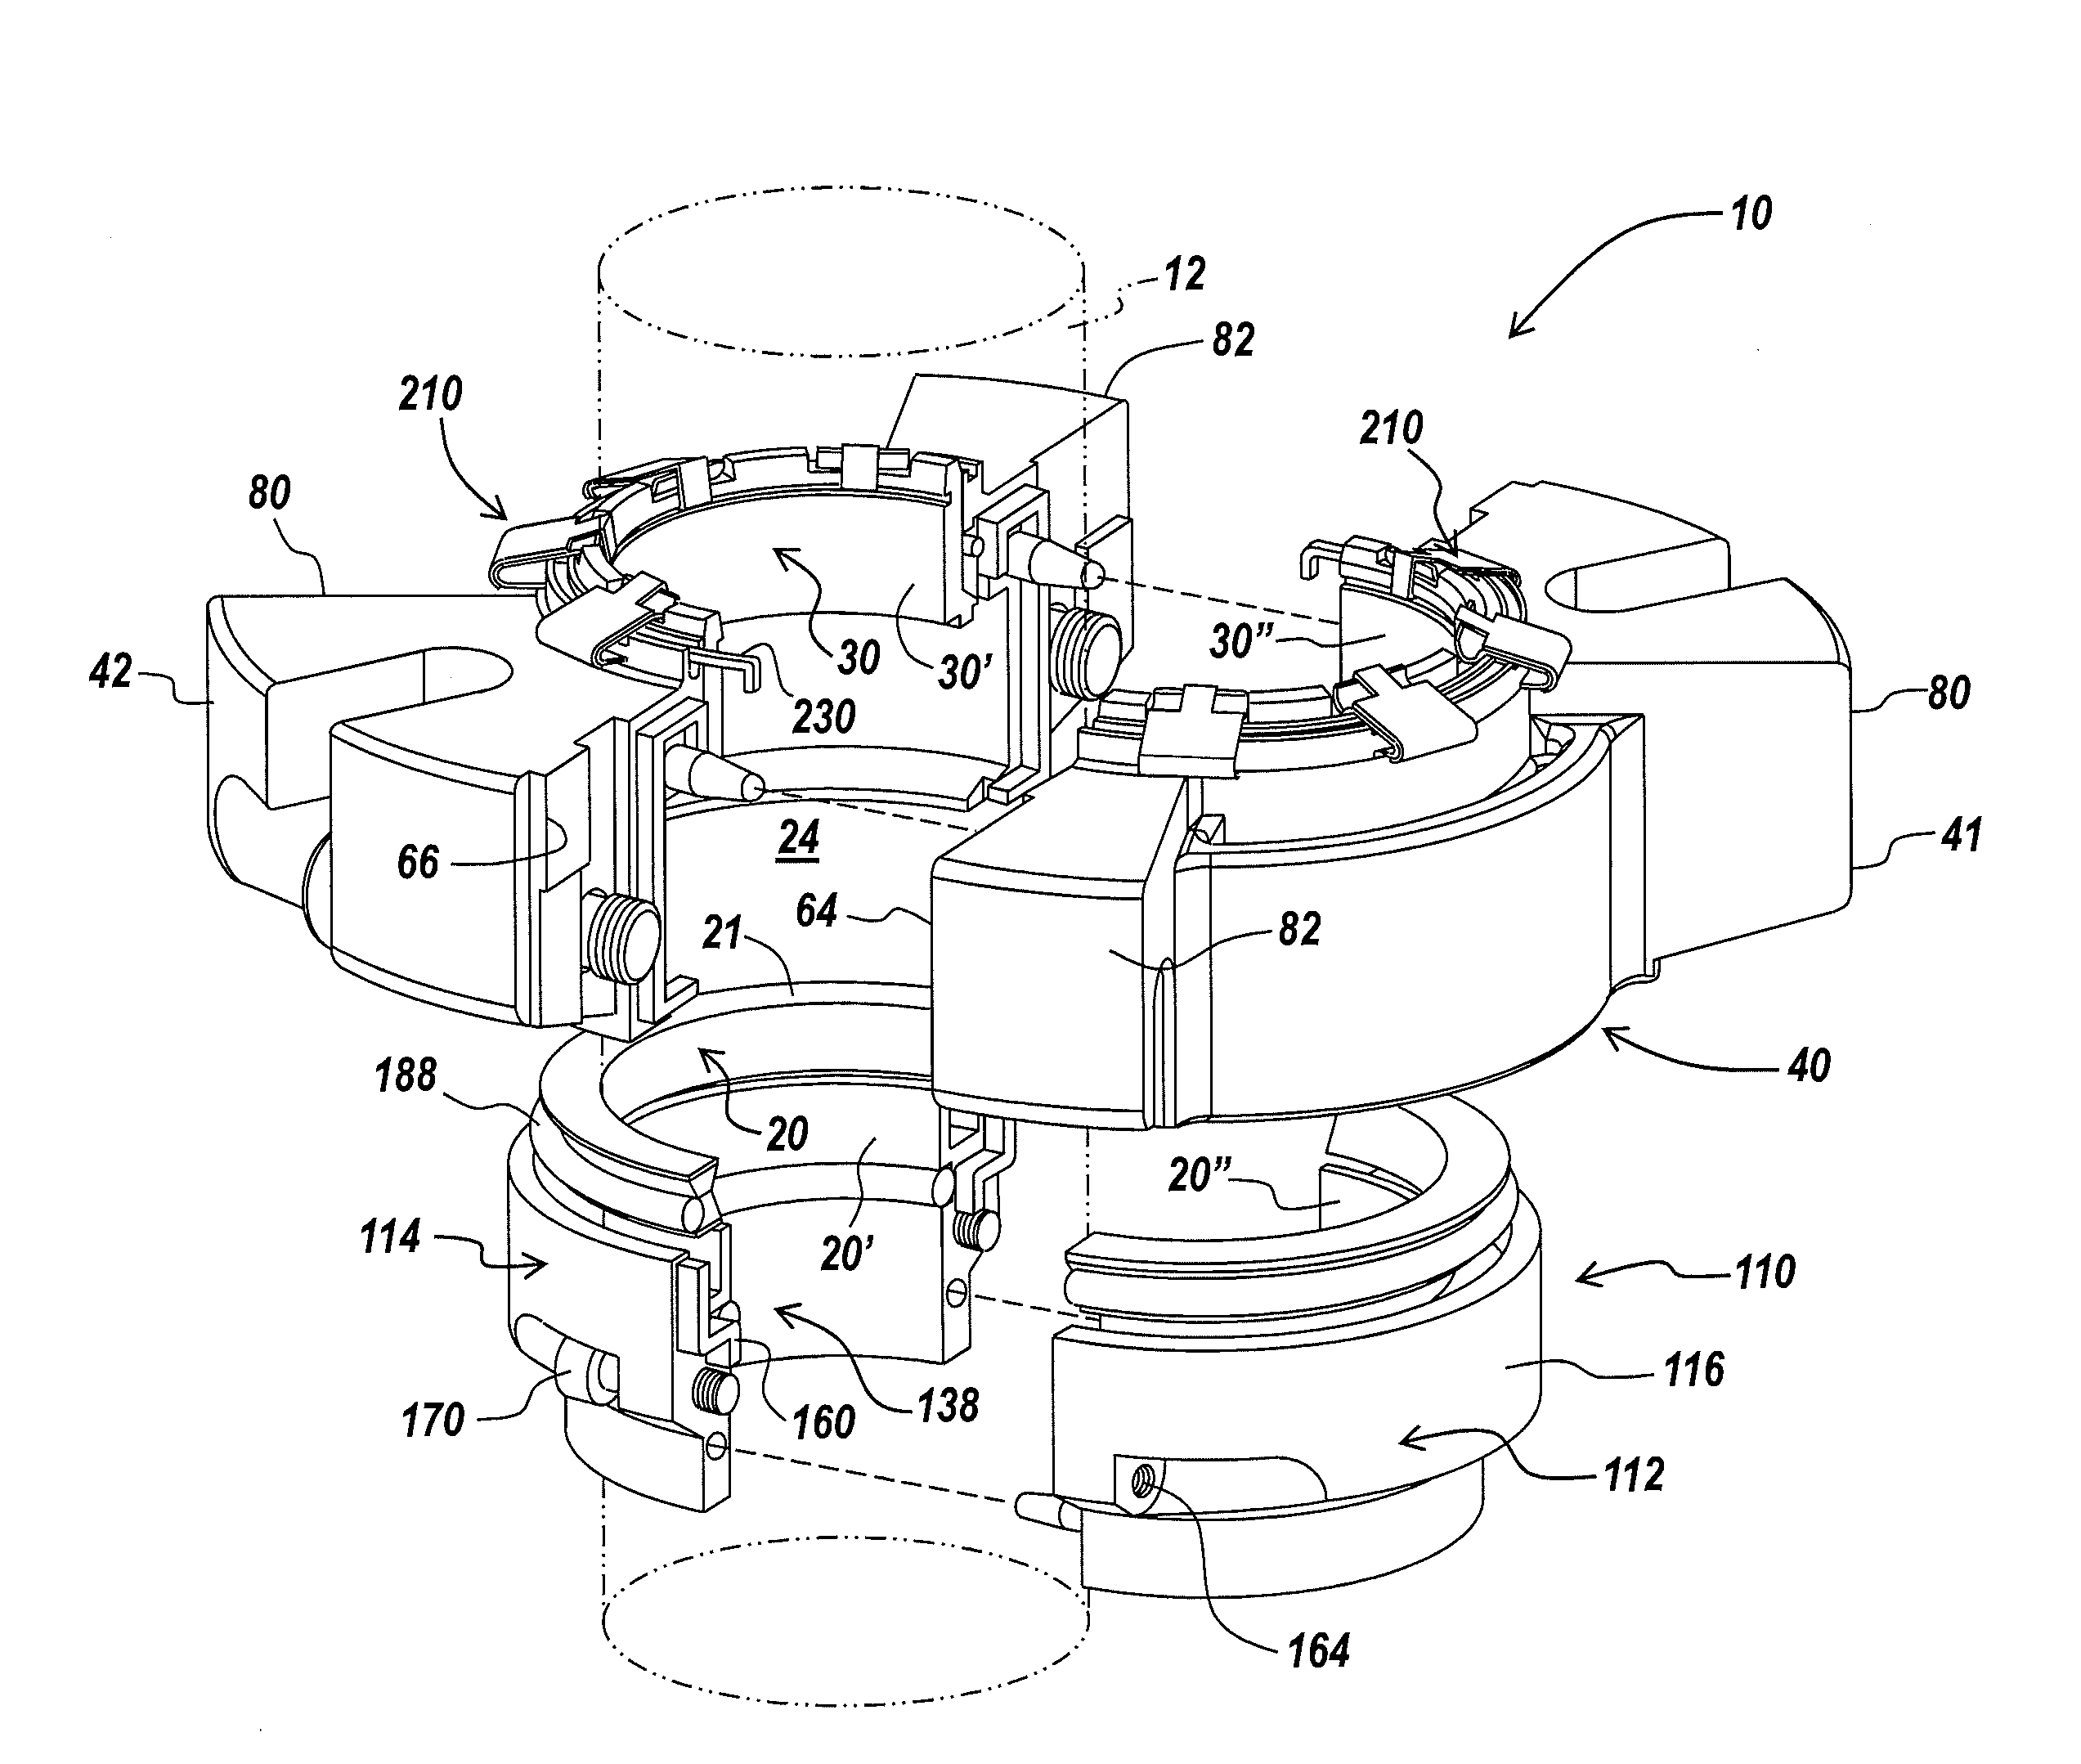 Self aligning split mechanical seal employing a selectively engageable axial biasing assembly